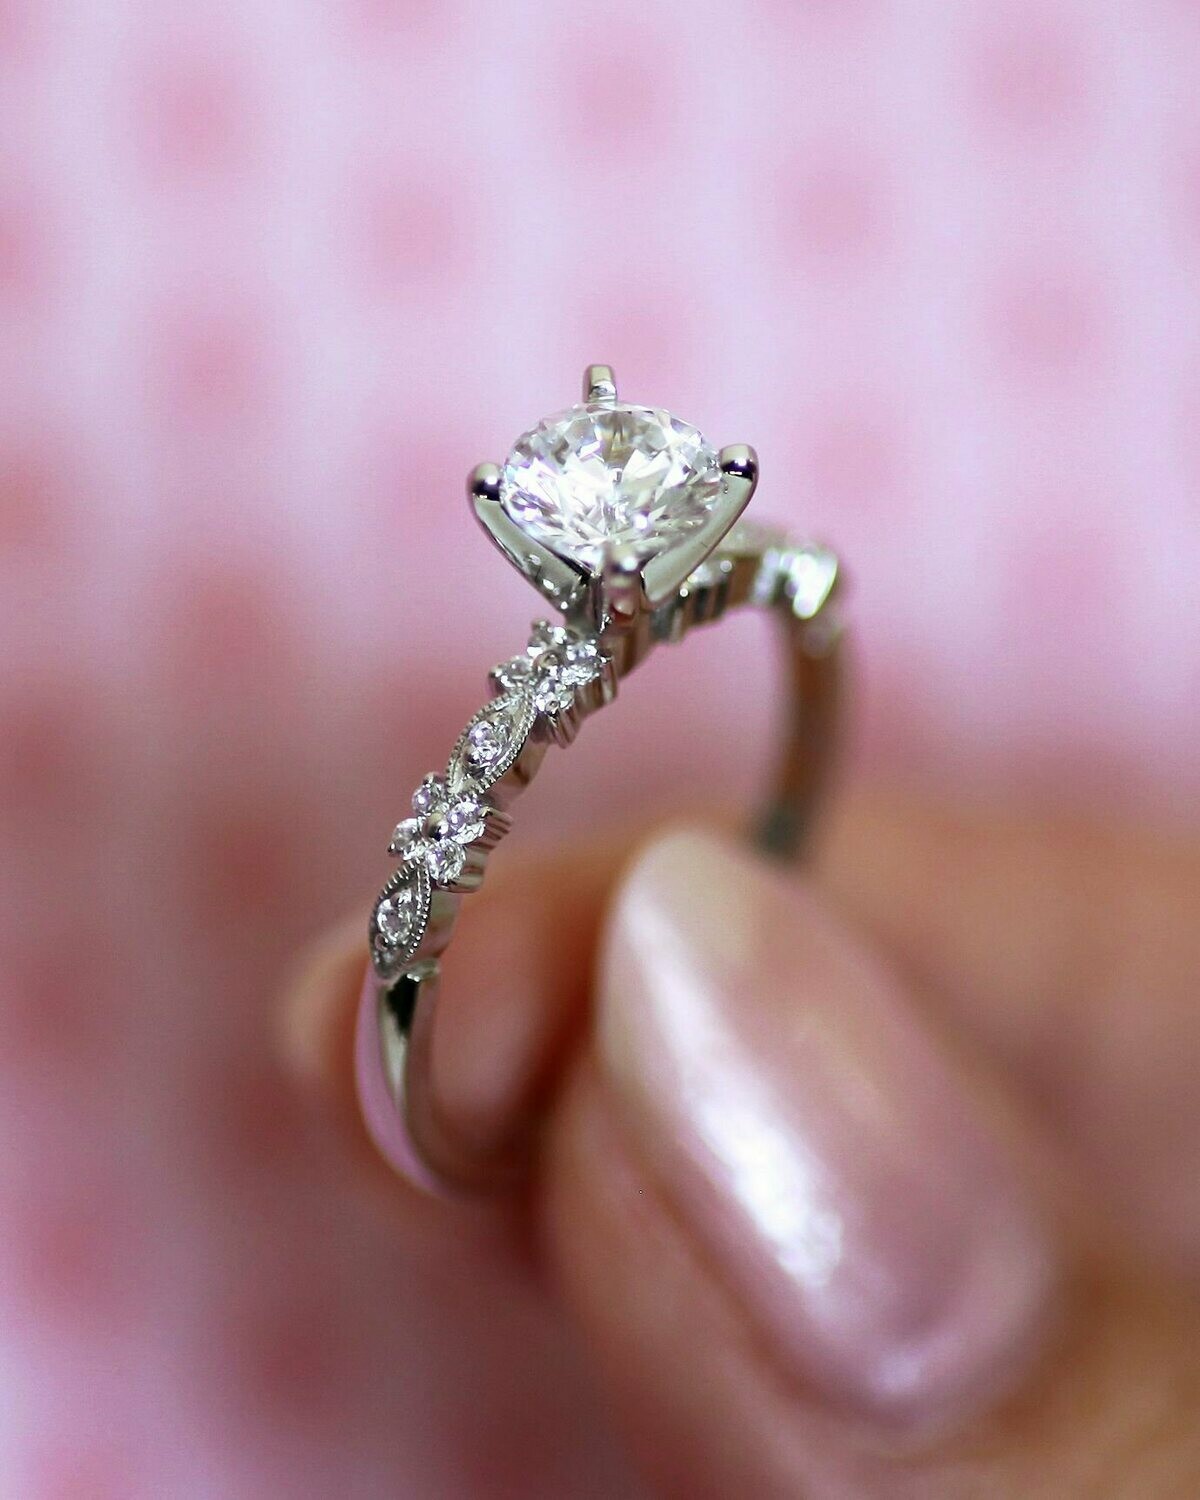 Purchase the High-Quality Design Solitaire Engagement Rings | GLAMIRA.com